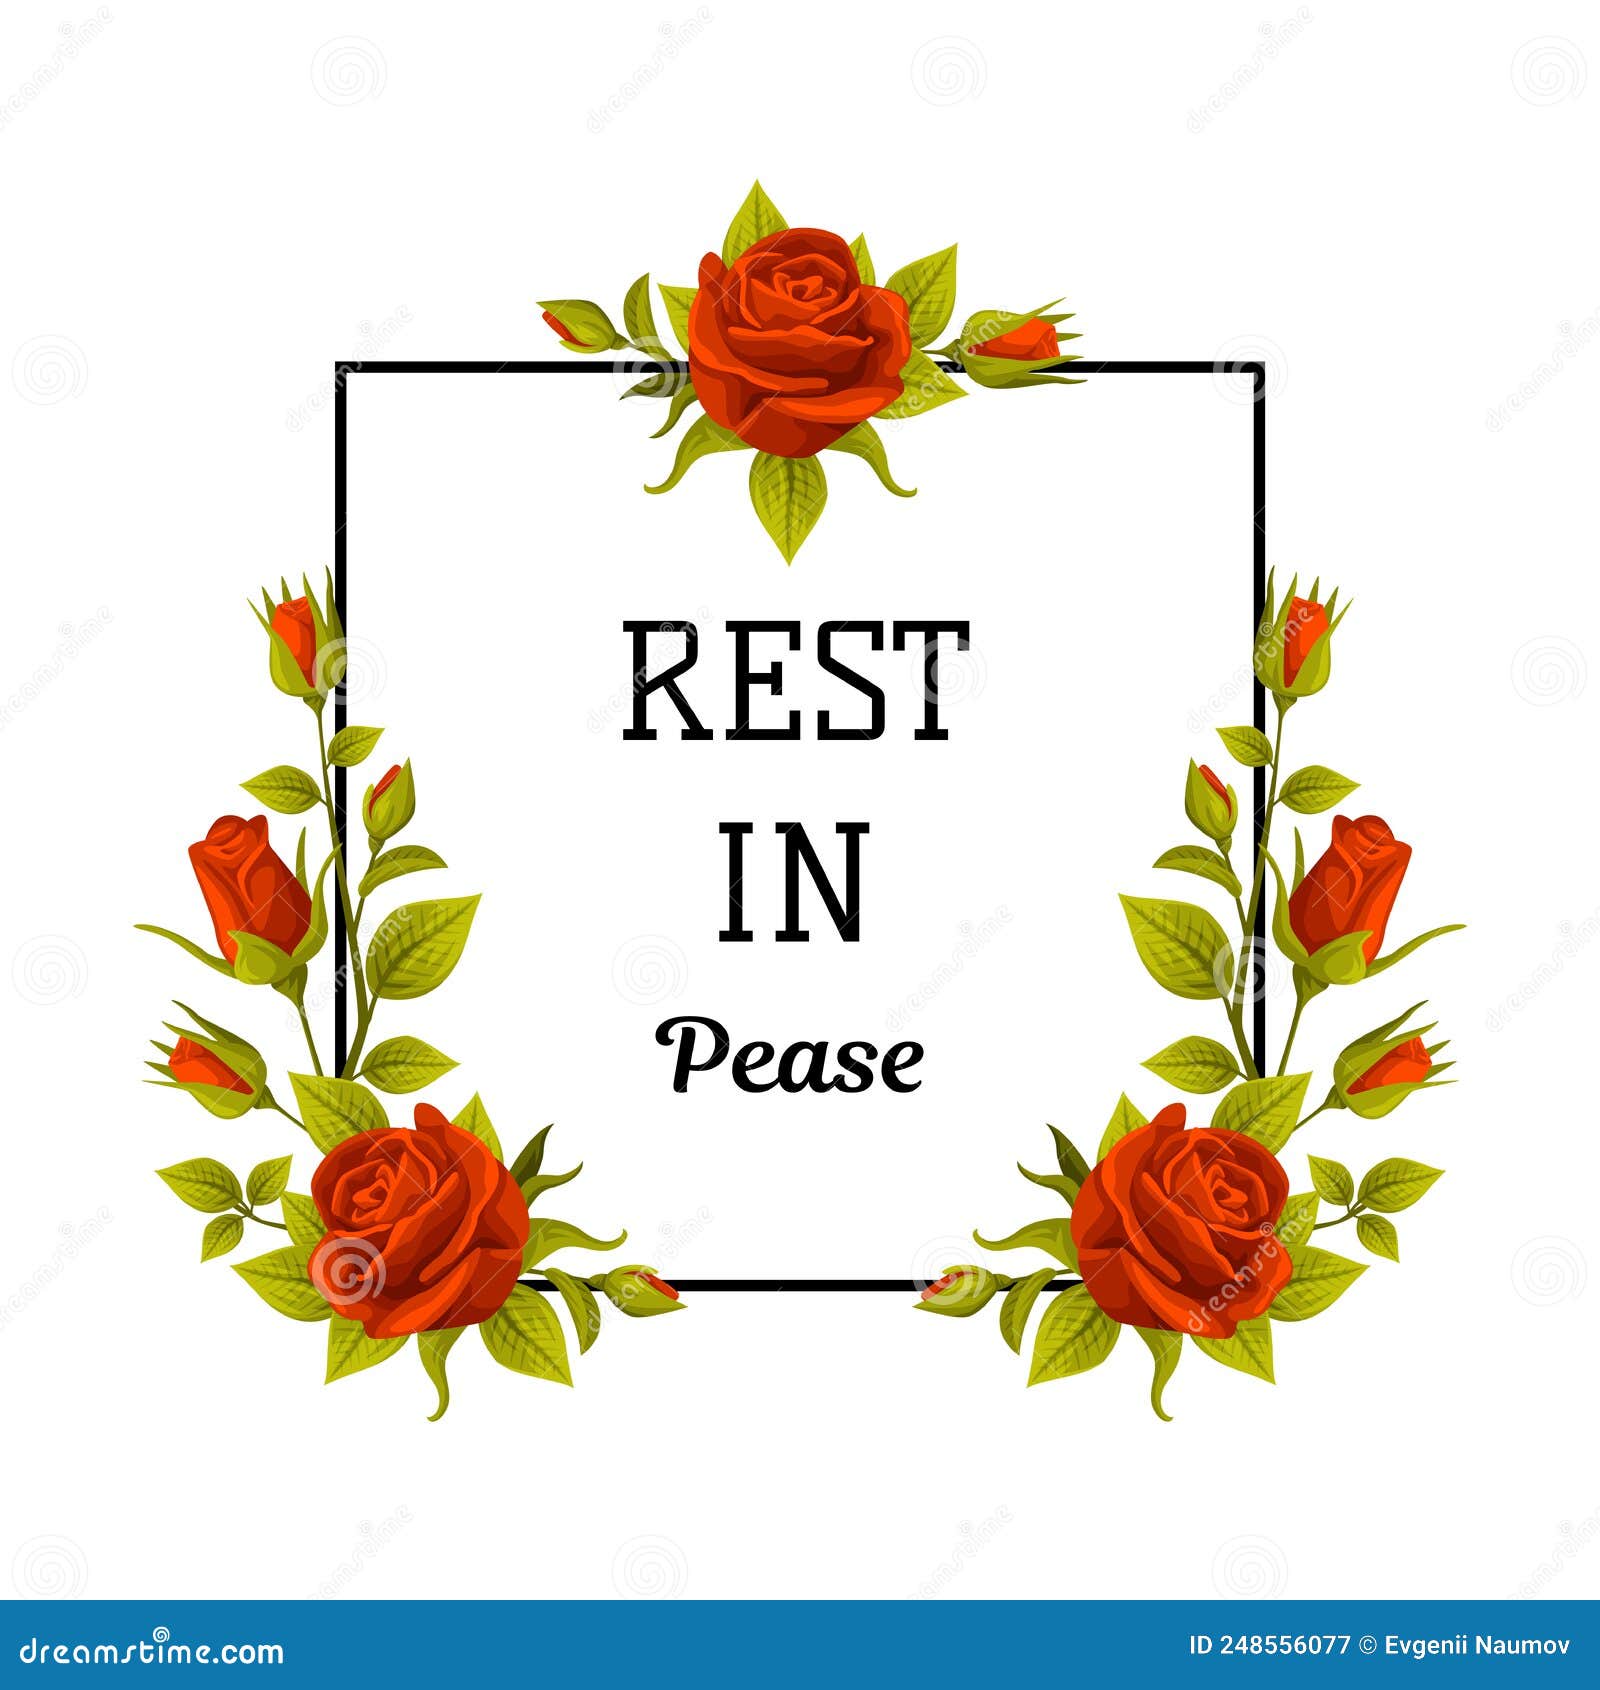 Funeral red rose oval frame with rest in peace Vector Image